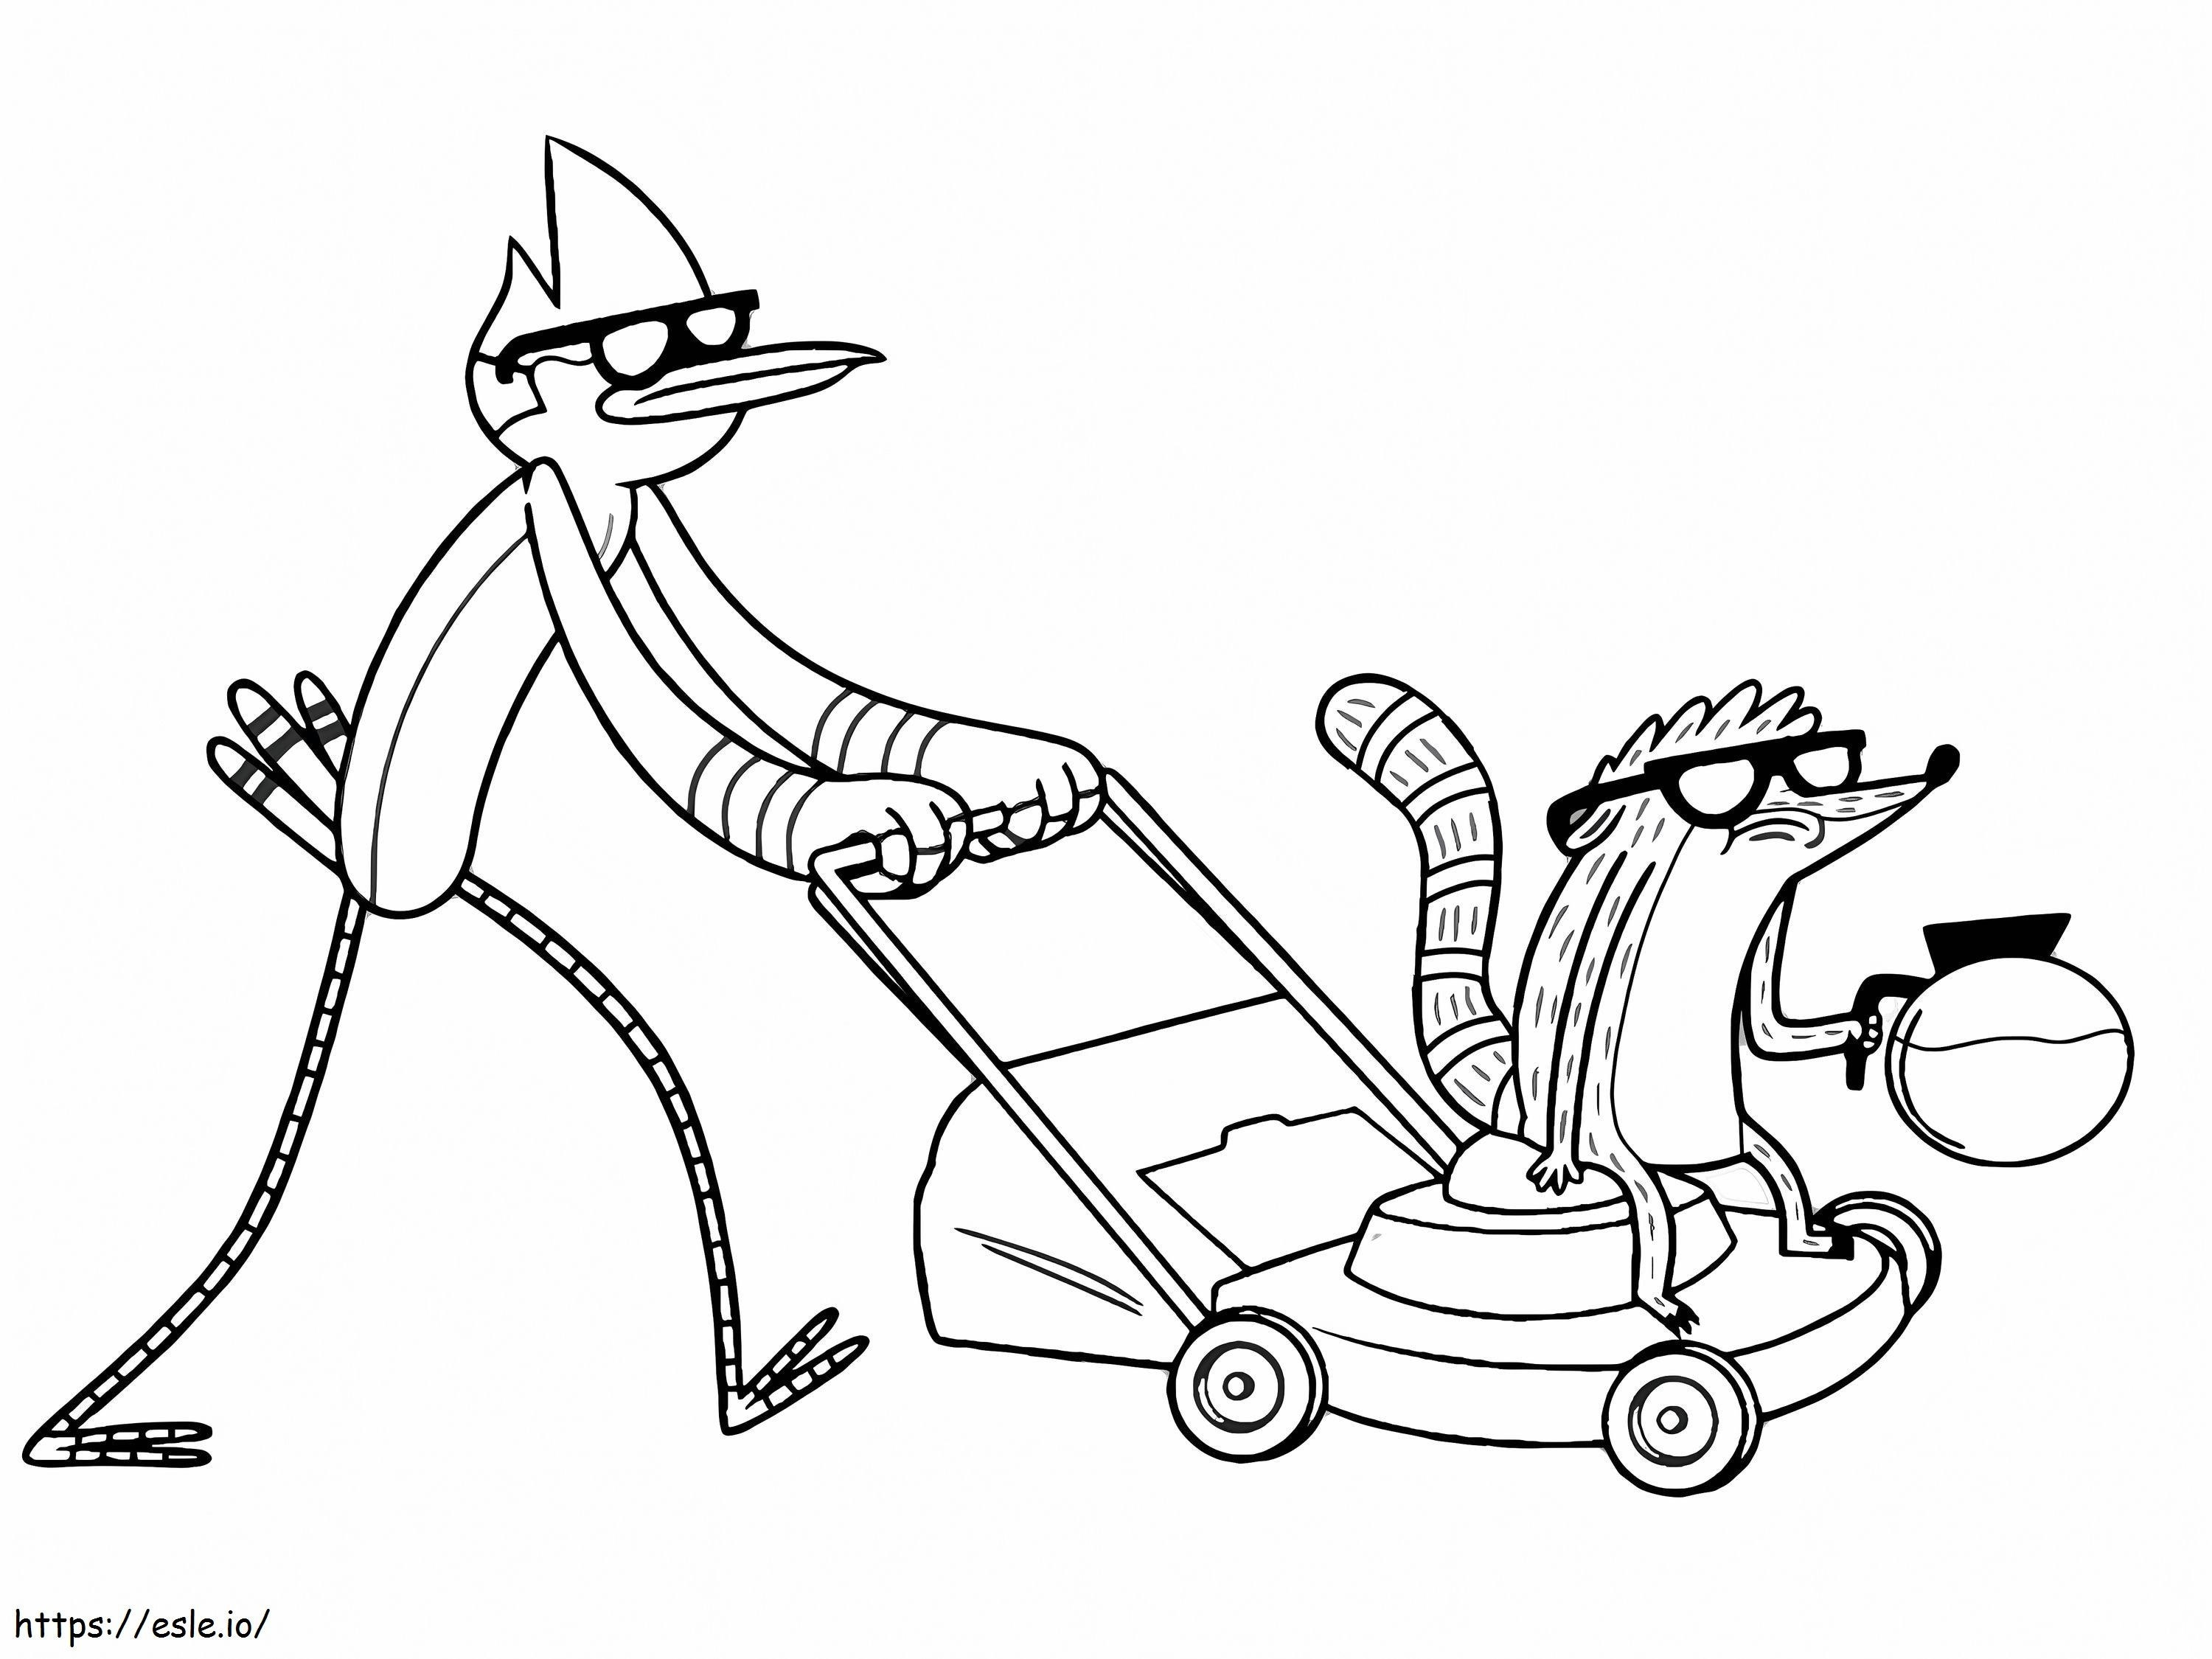 1550907488 Regular Show 002 coloring page